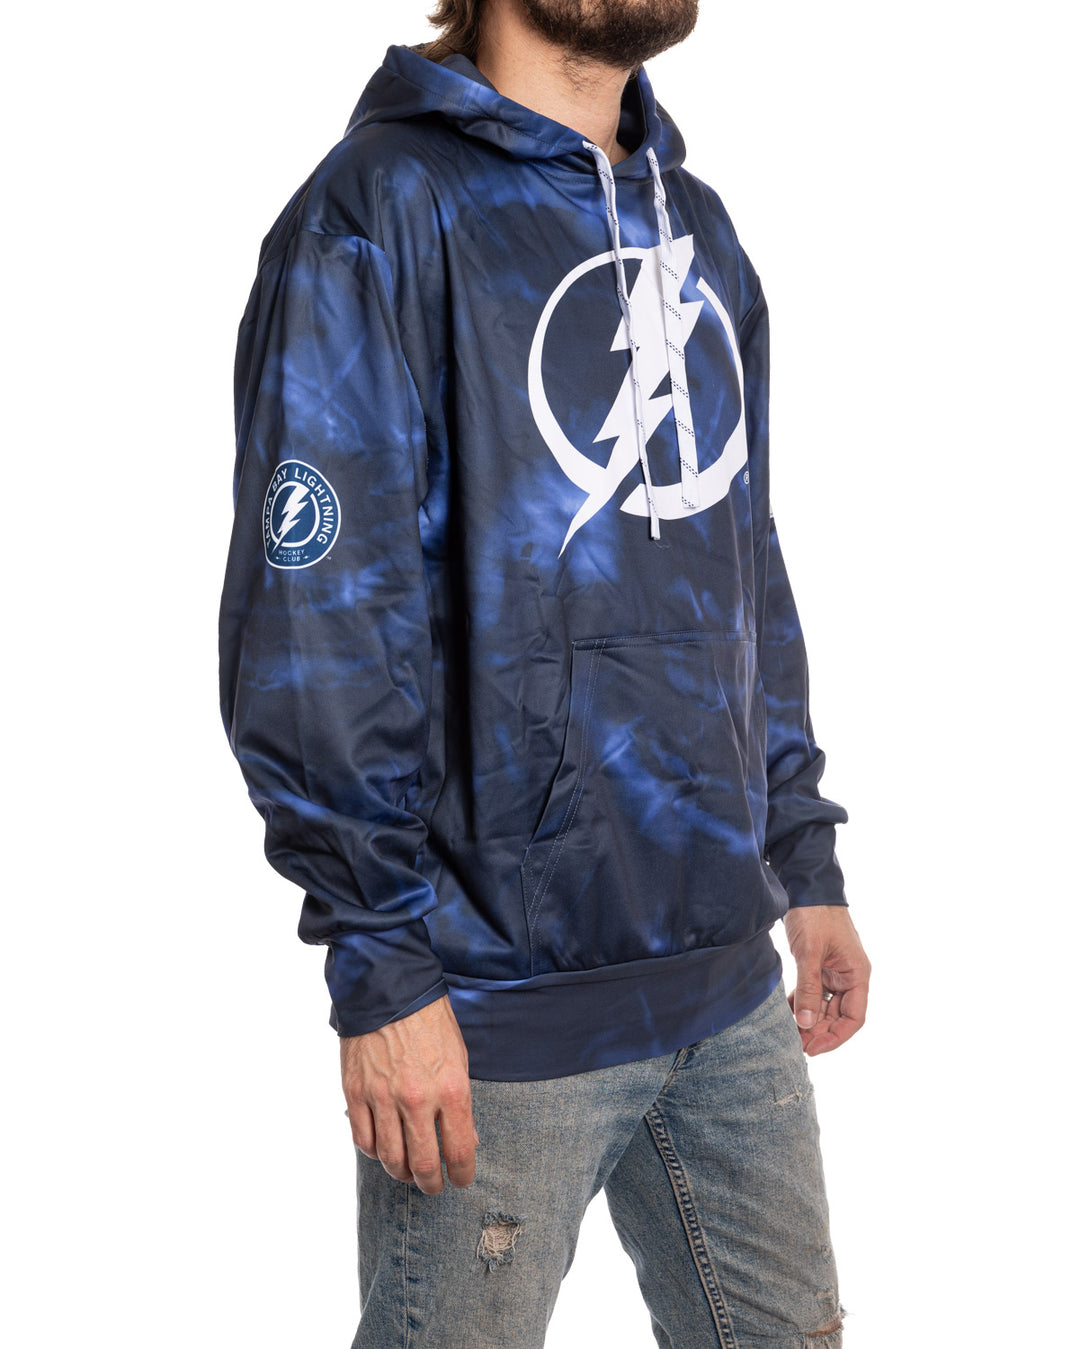 Tampa Bay Lightning Sublimation Hoodie